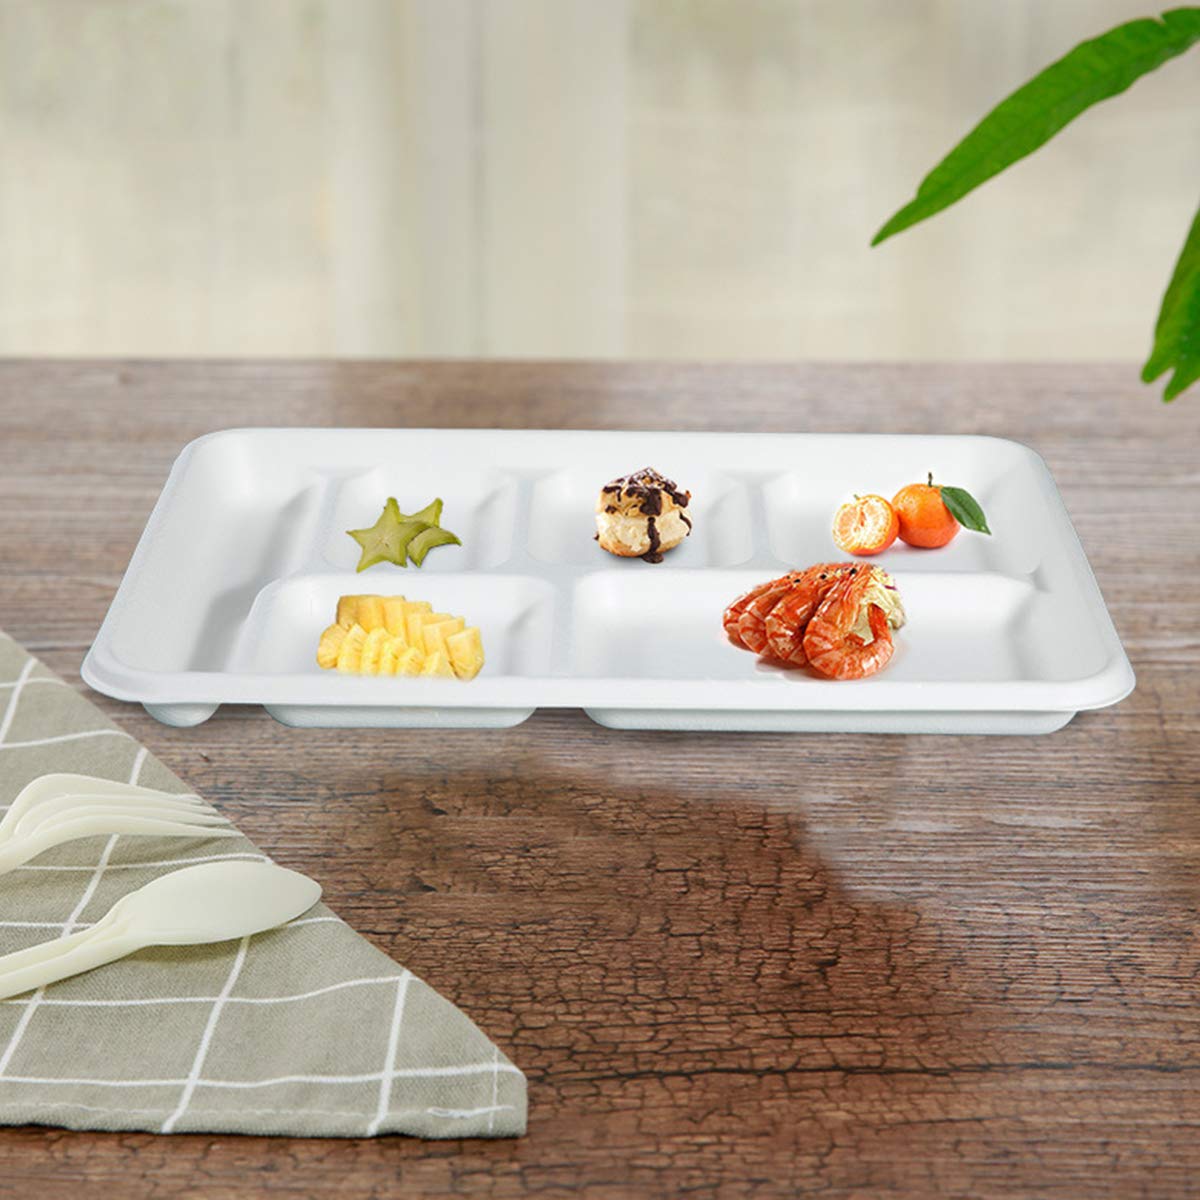 Bekith 60 Pack 6-Compartment Disposable Paper Plate, 100% Compostable Bagasse School Lunch Tray, Heavy-Duty Sectional Plates Eco-Friendly Made of Sugar Cane Fibers